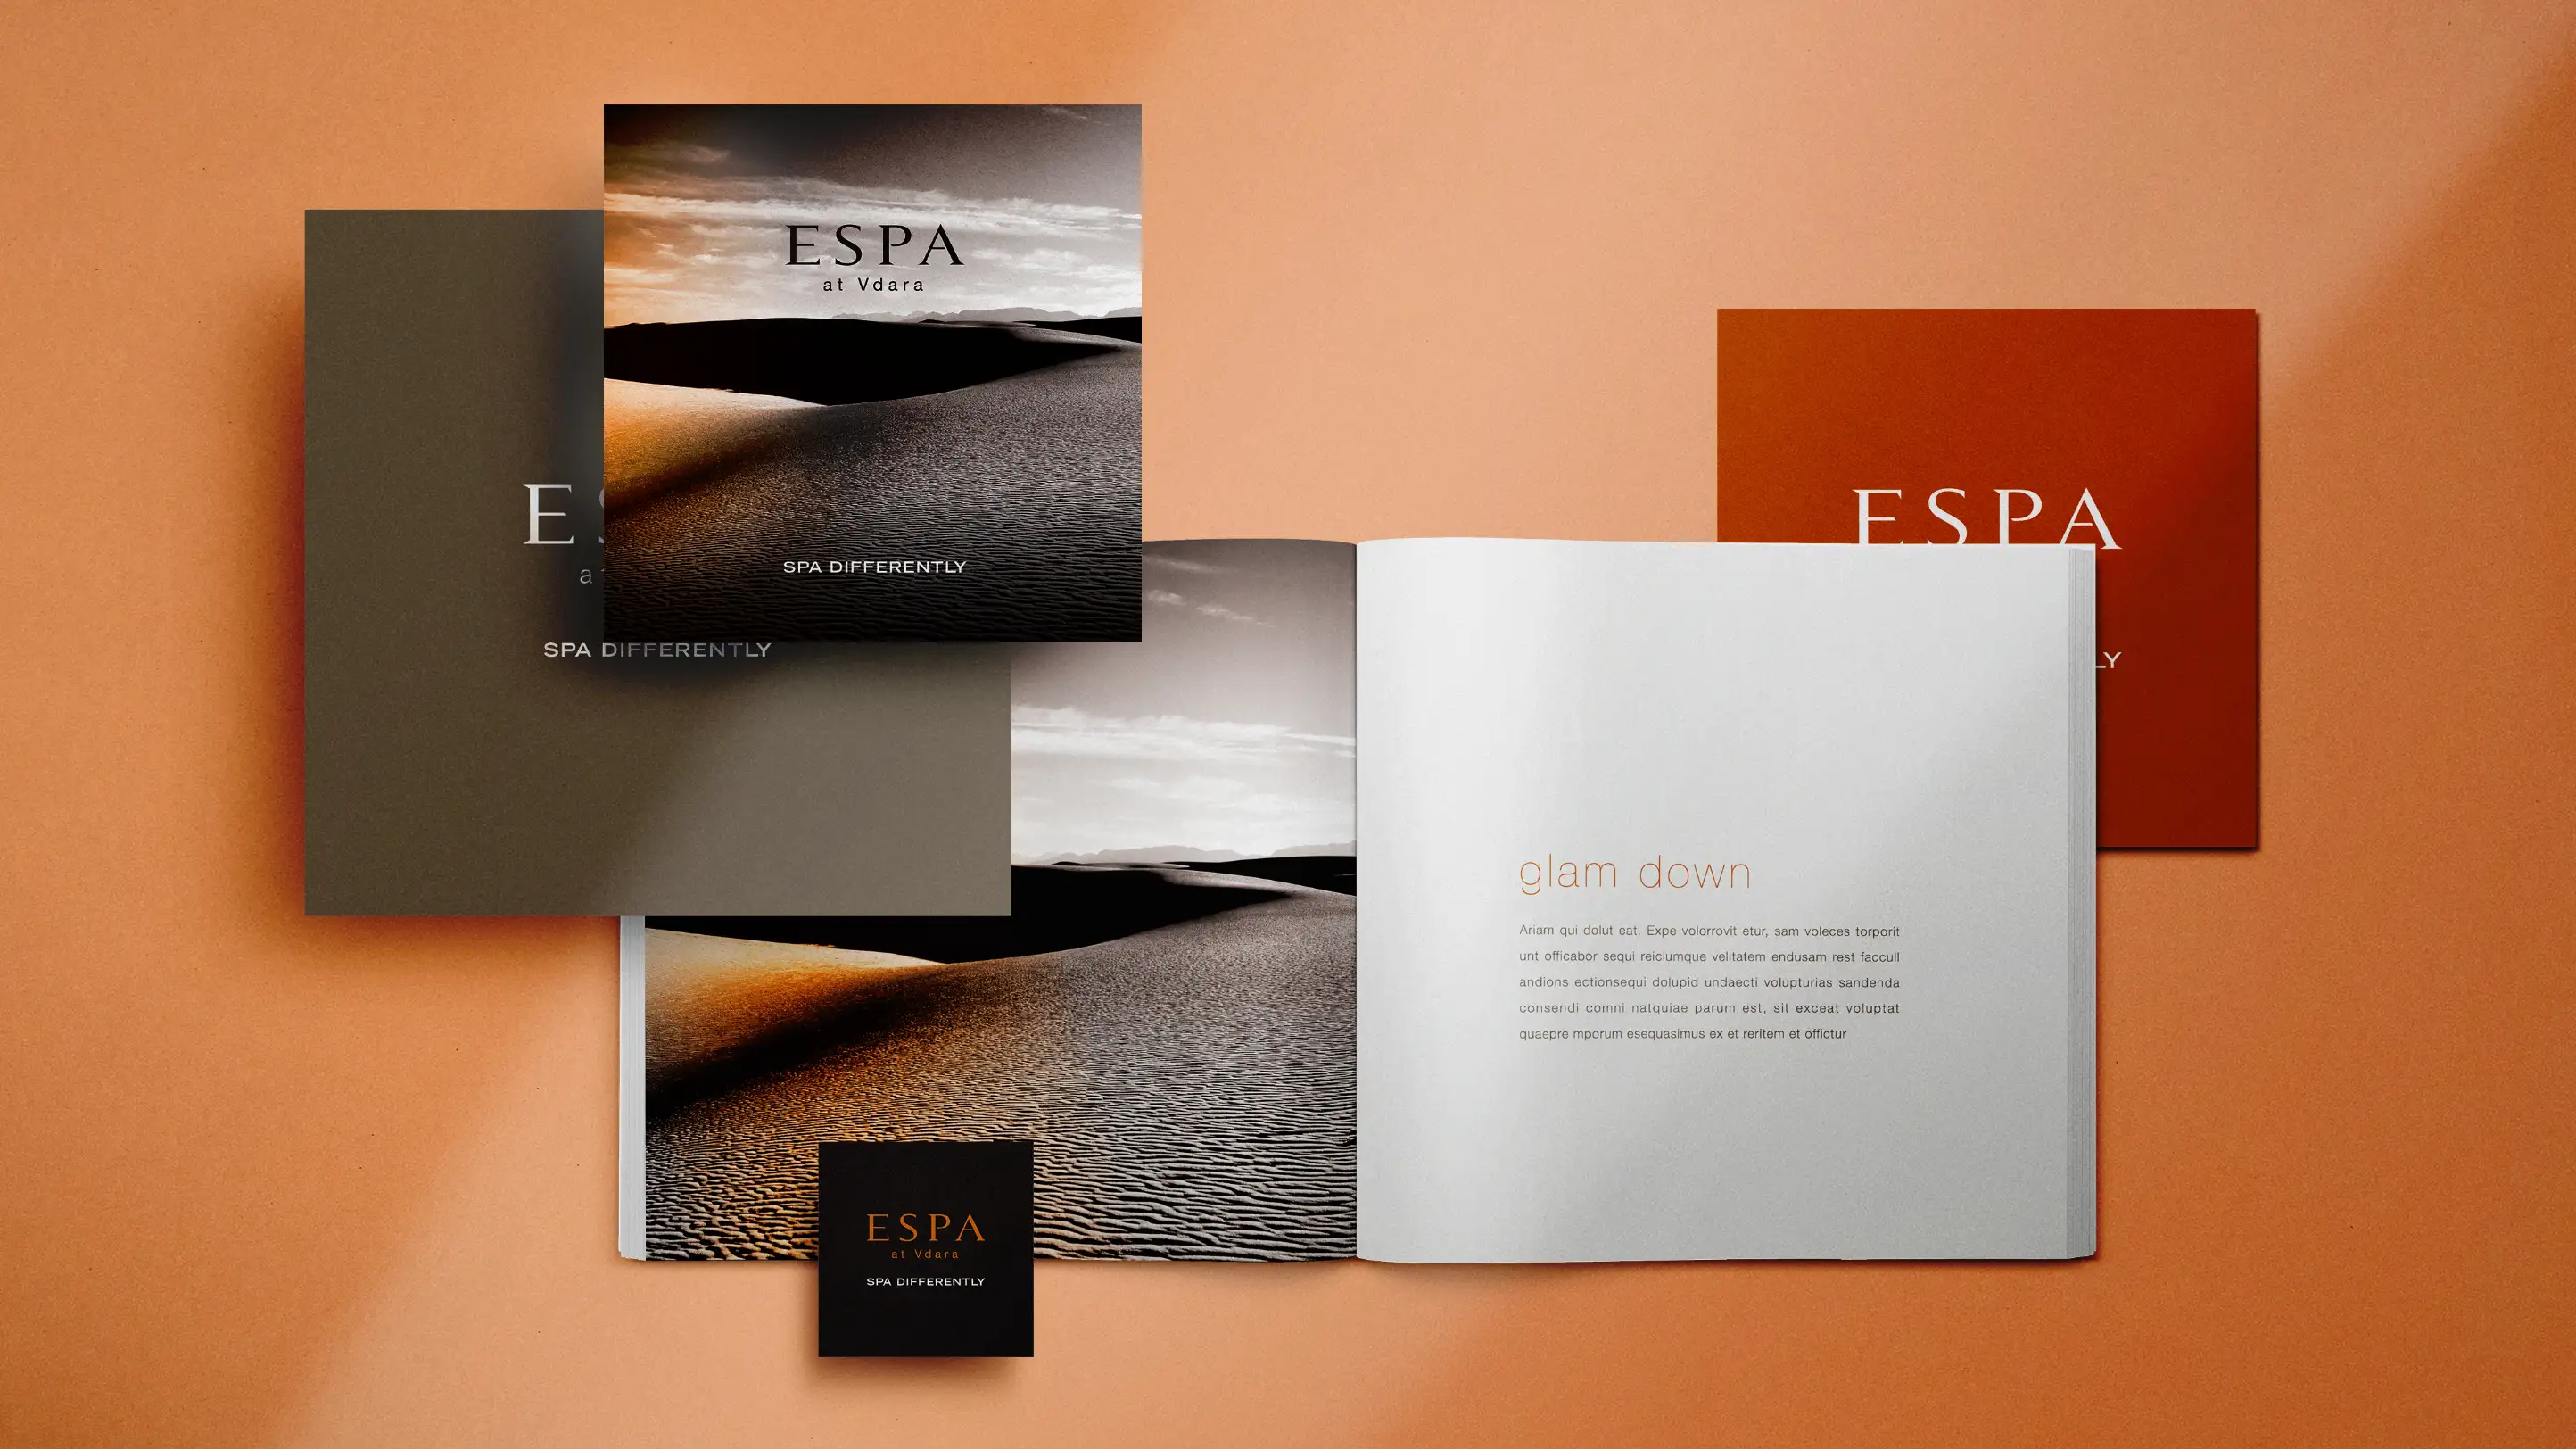 Collateral print design for Espa at Vdara spa and salon, including square brochure, offer card, comment card and ammenity card.